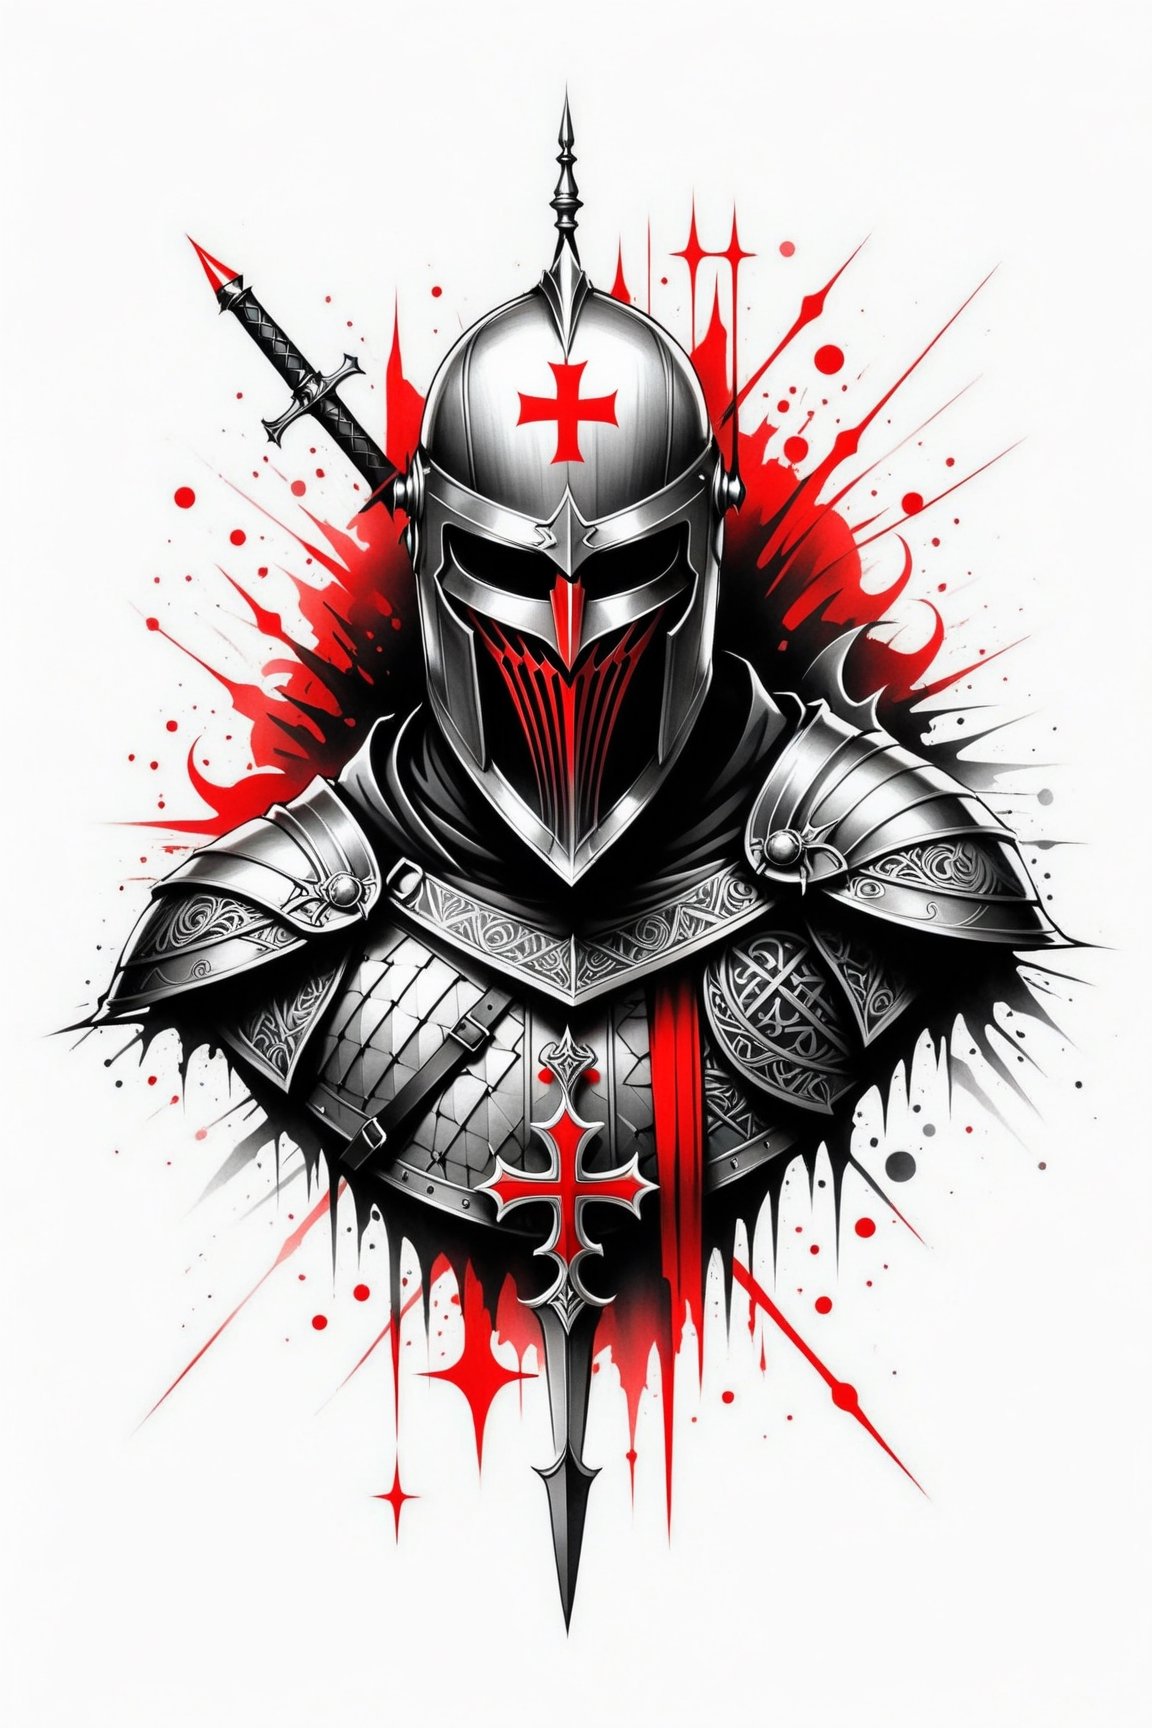 lineart tattoo design, Knight Templar, geometric forms with red cross superimpossed, ((drawing lines)), drawing in black and withe, thick lines, filagree, realistic, silkscreen dot pattern in background, white background, monster, Leonardo Style,Pencil Draw,Fashion Illustration,Flat vector art,pencil sketch,1y0n